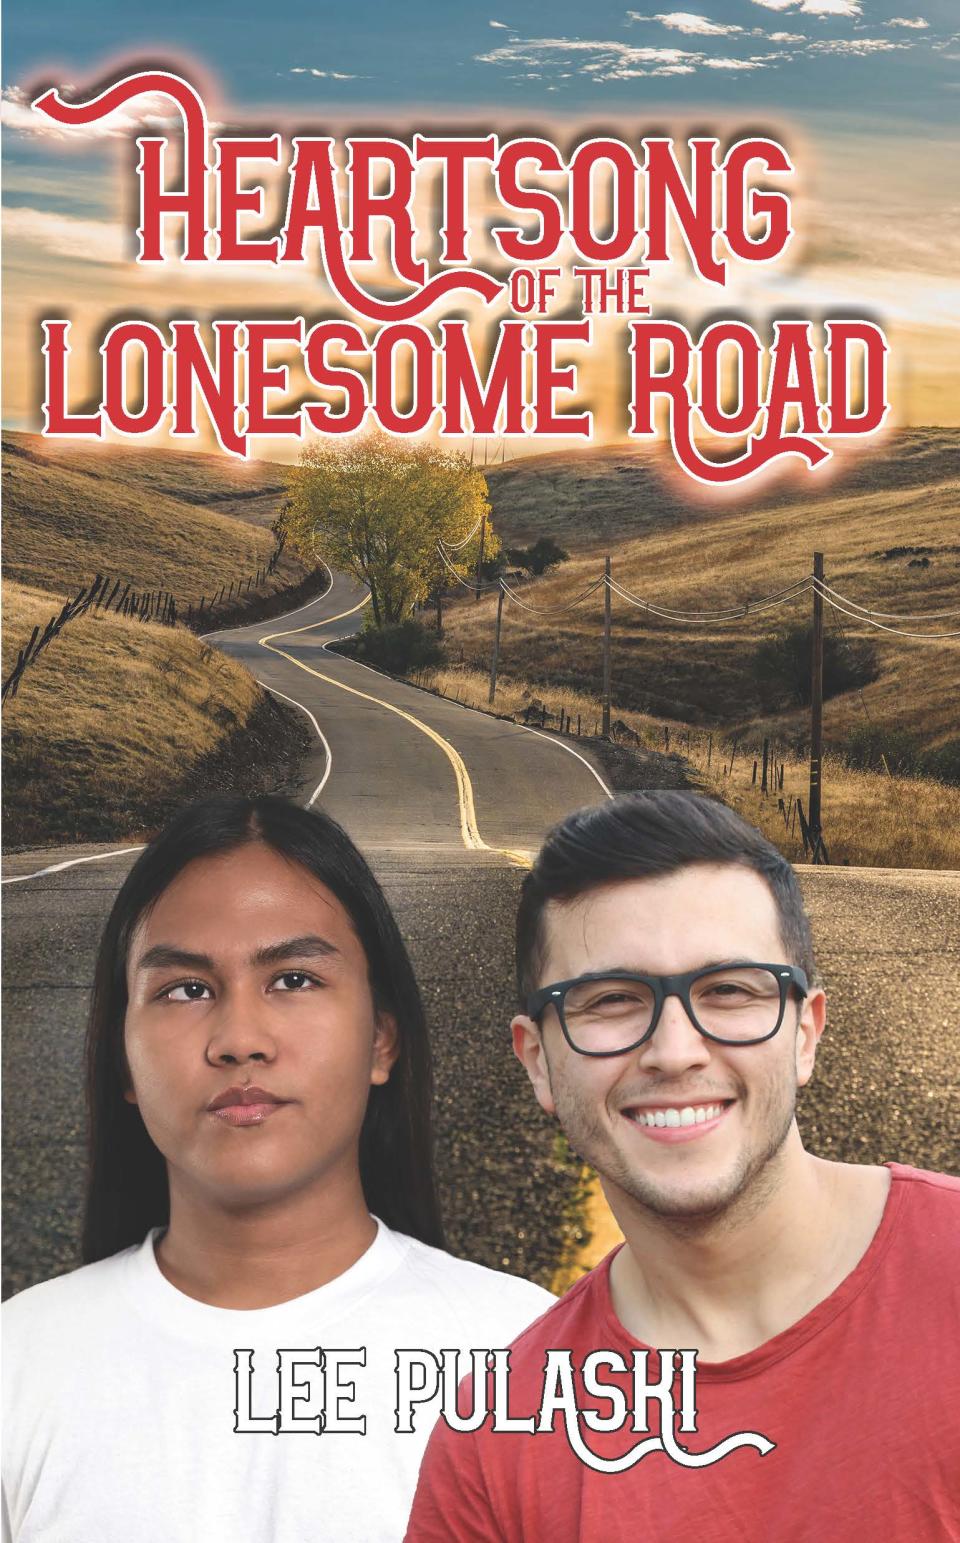 The cover of Lee Pulaski's latest book, "Heartsong of the Lonesome Road"